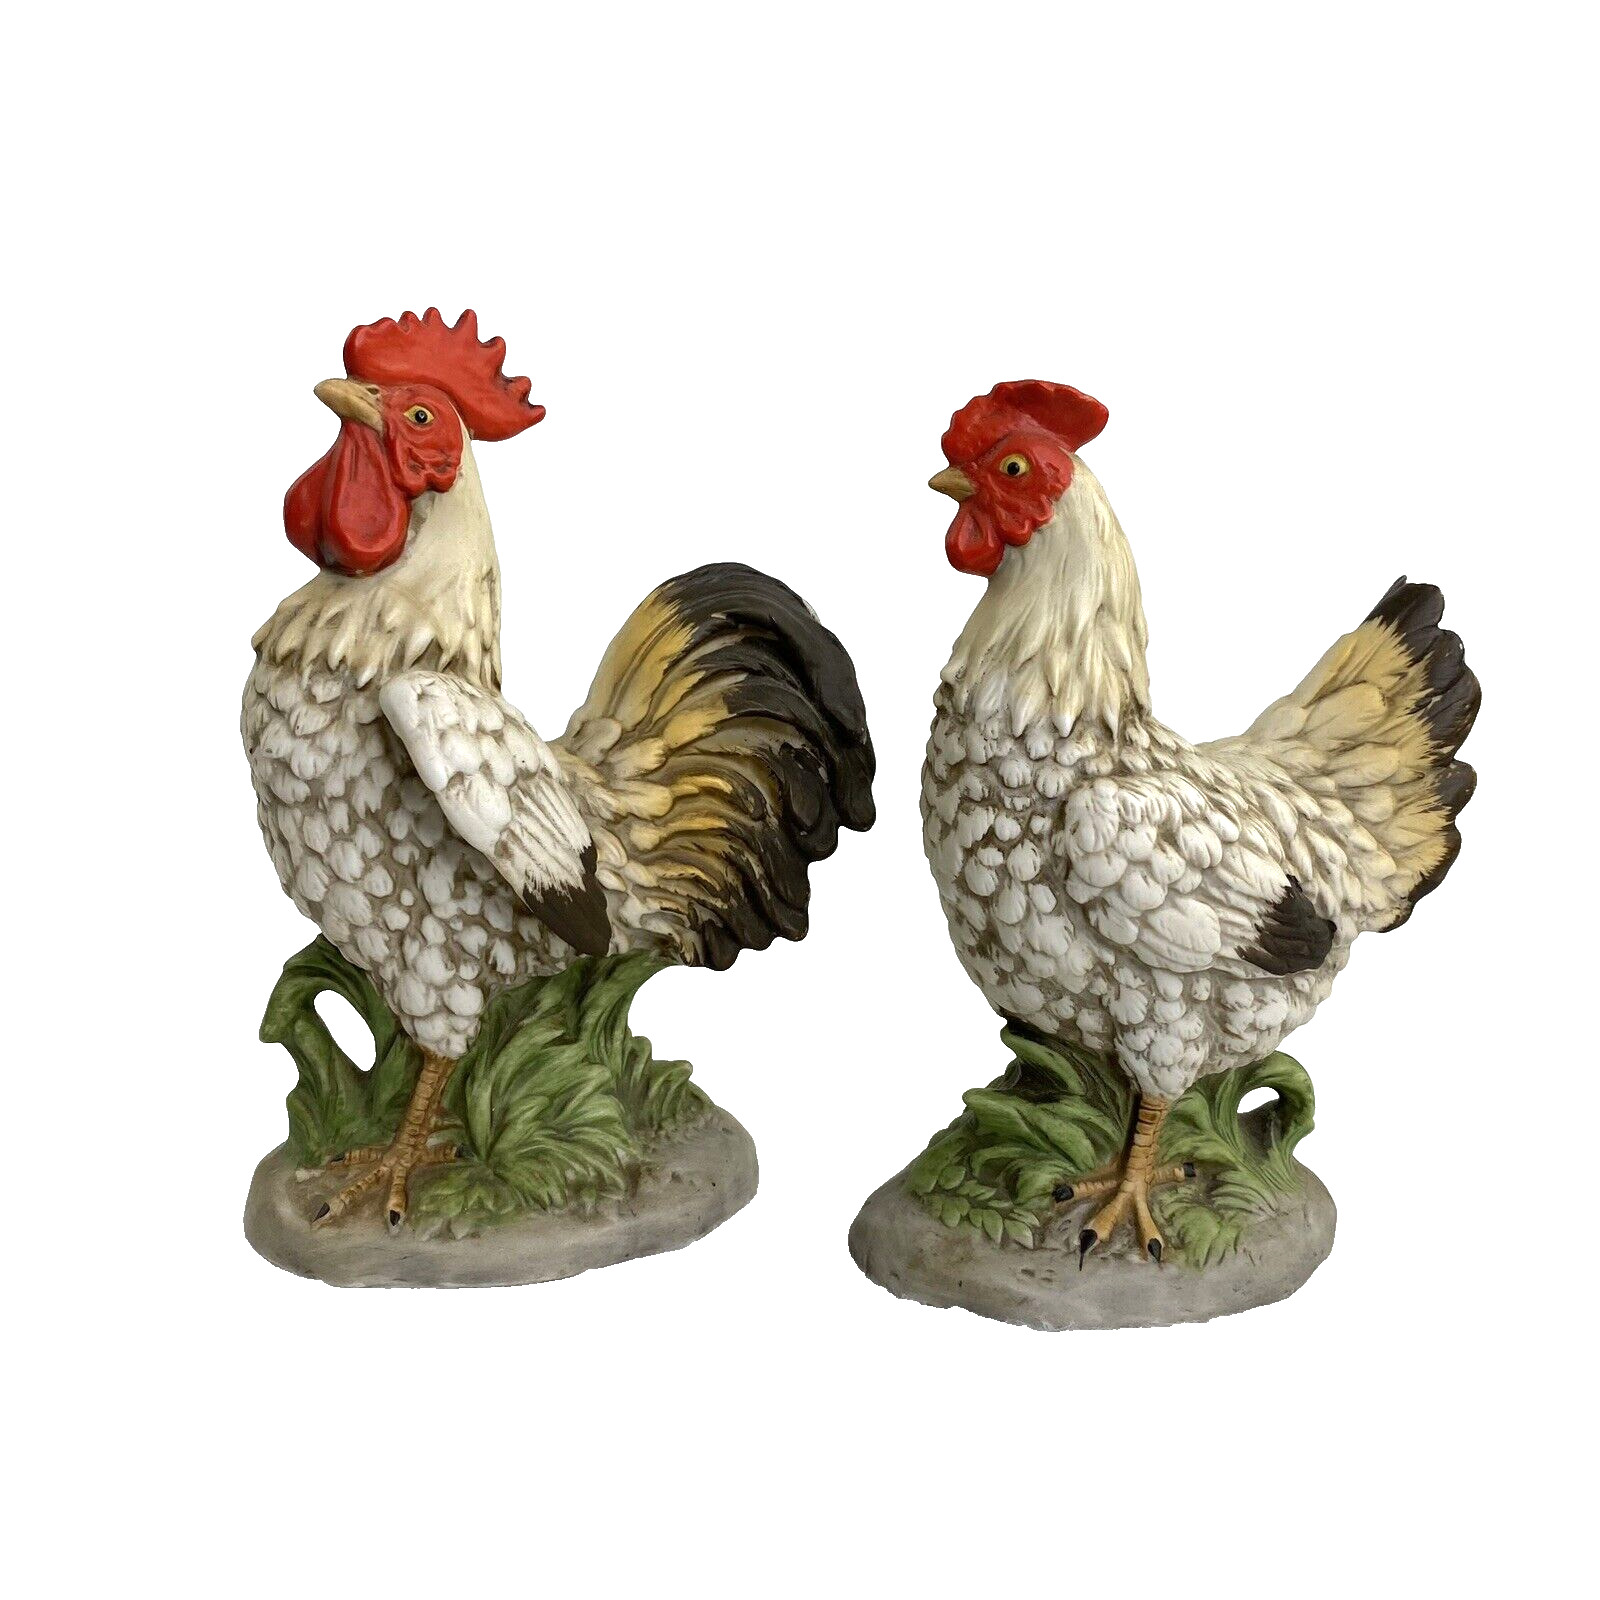 Vintage Homco Ceramic Rooster and Hen Figurines #1446 Farmhouse Country READ